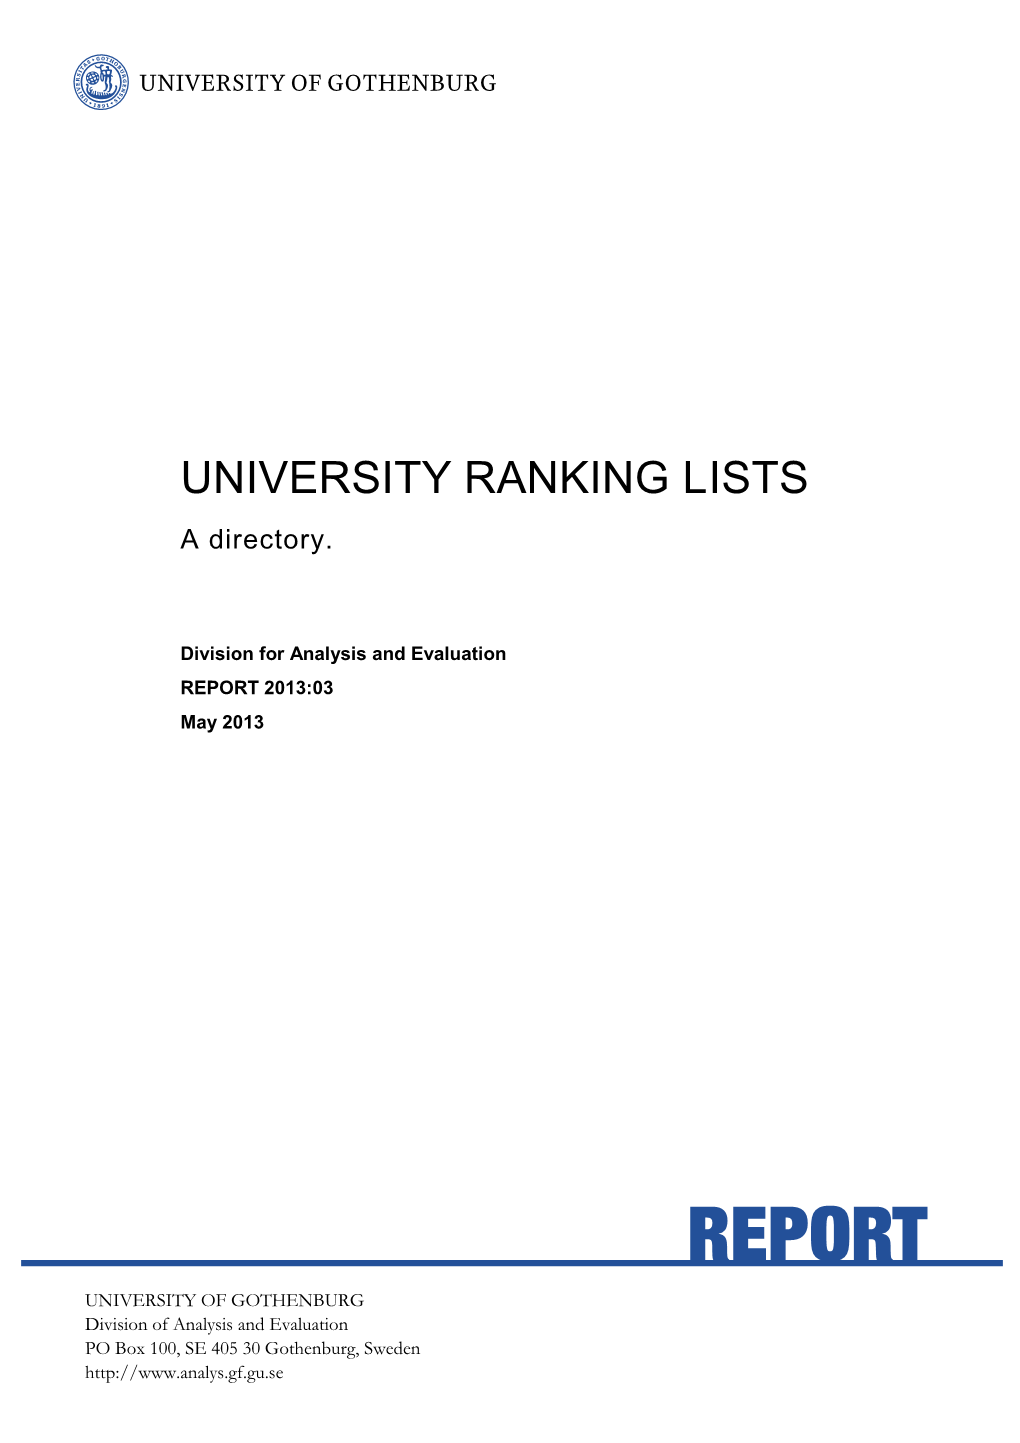 University Ranking Lists:A Directory